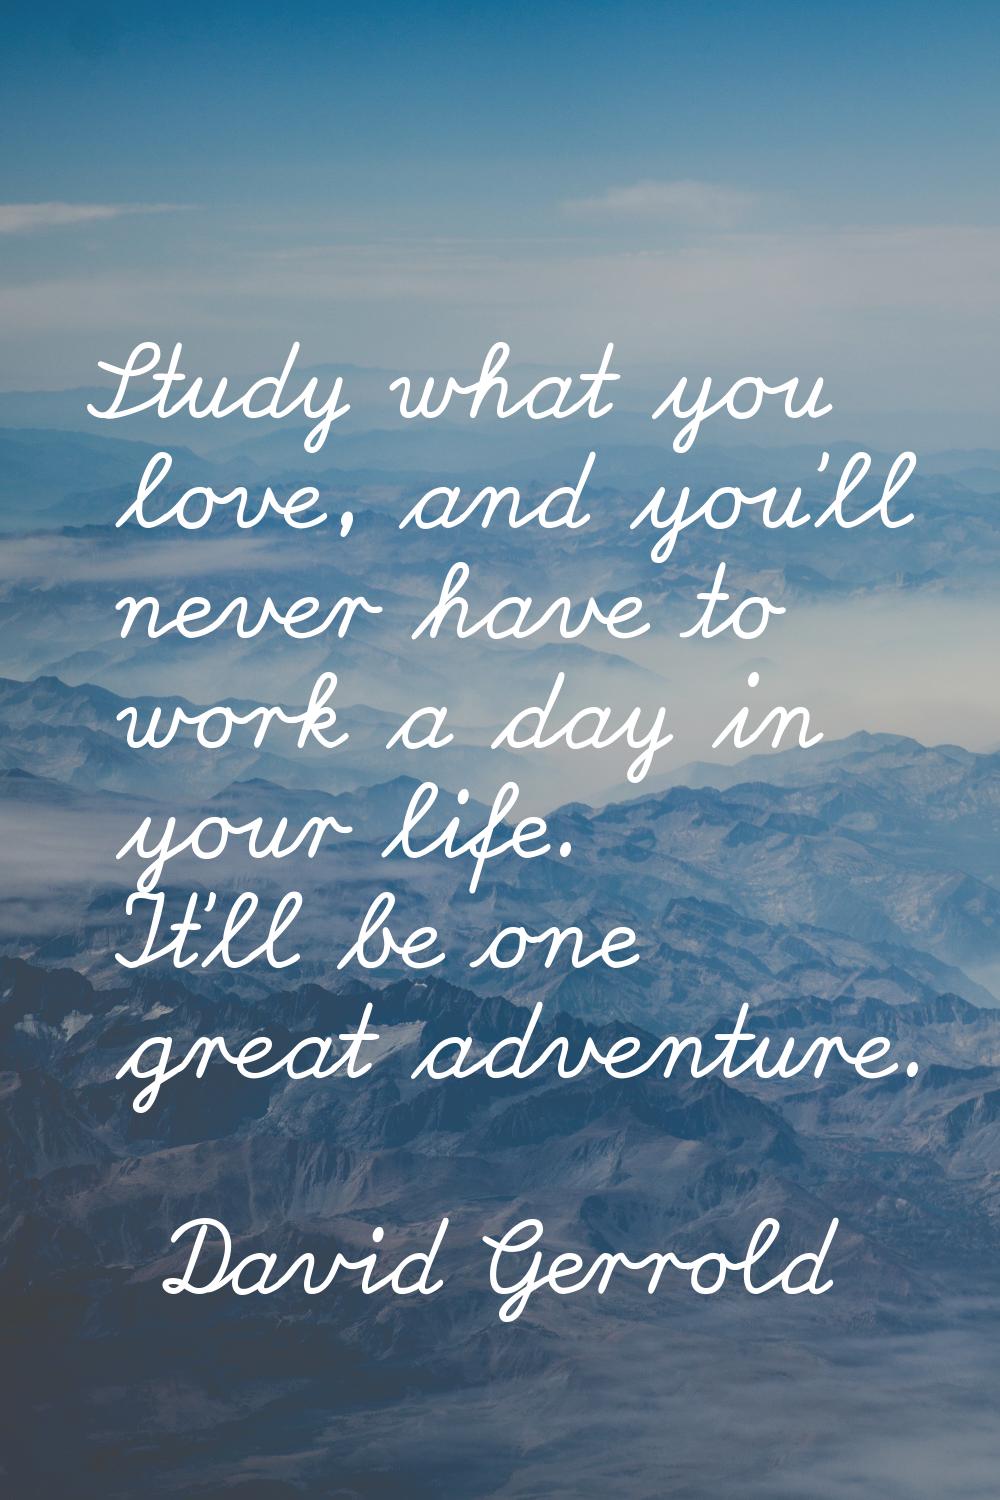 Study what you love, and you'll never have to work a day in your life. It'll be one great adventure